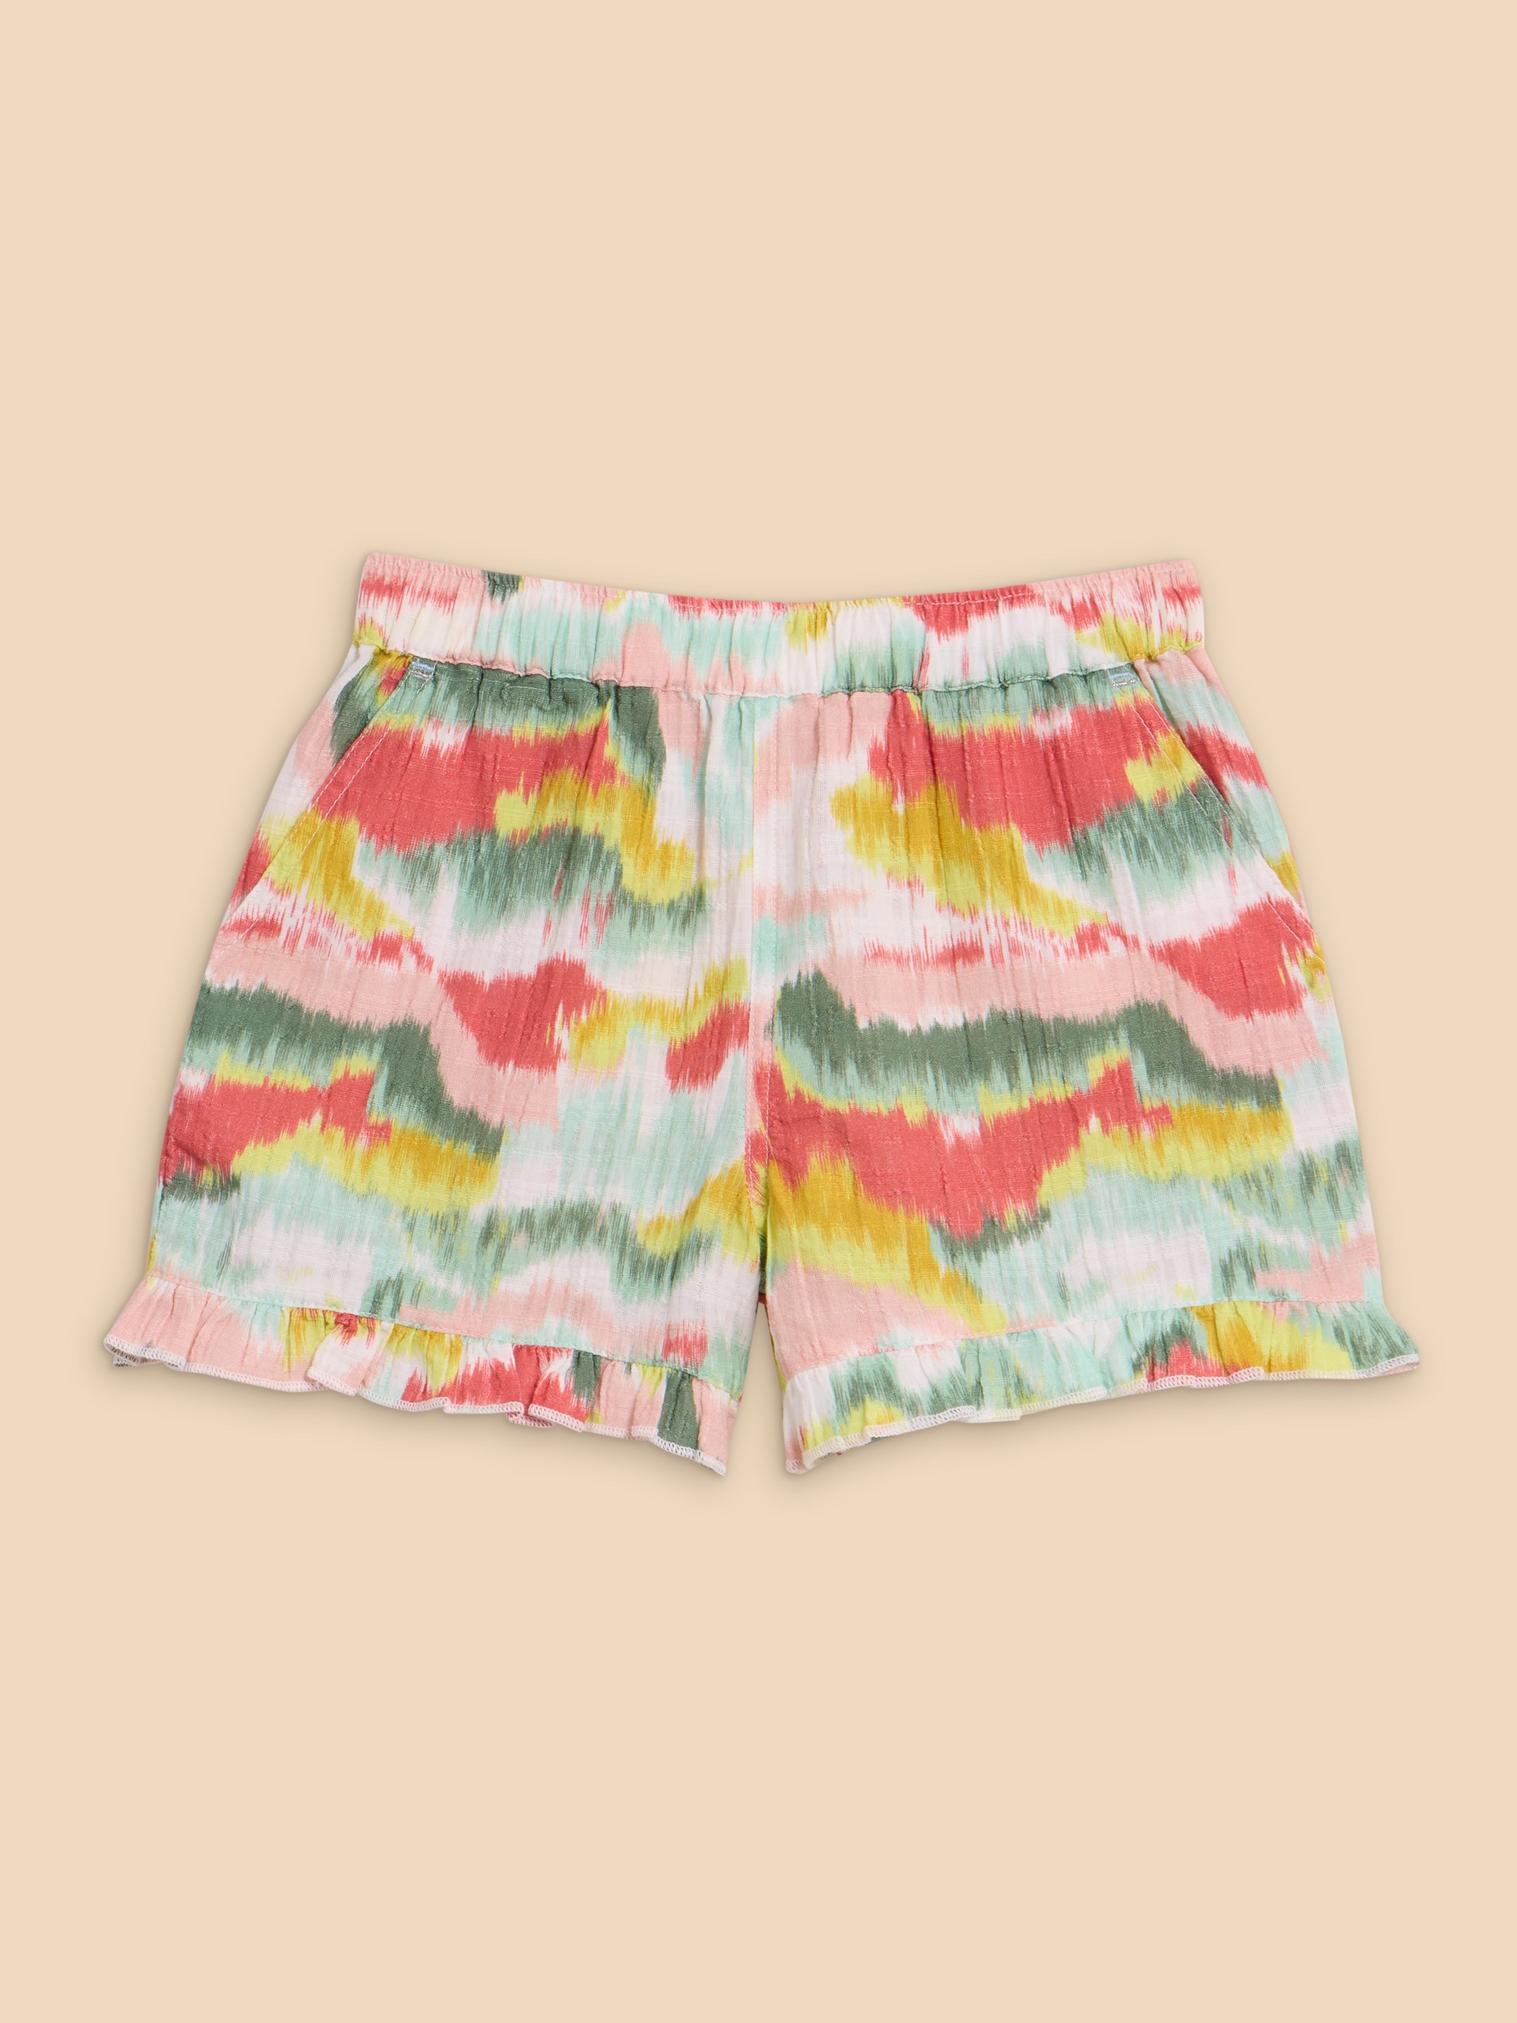 Tie Dye Printed Frill Short in PINK MLT - FLAT FRONT